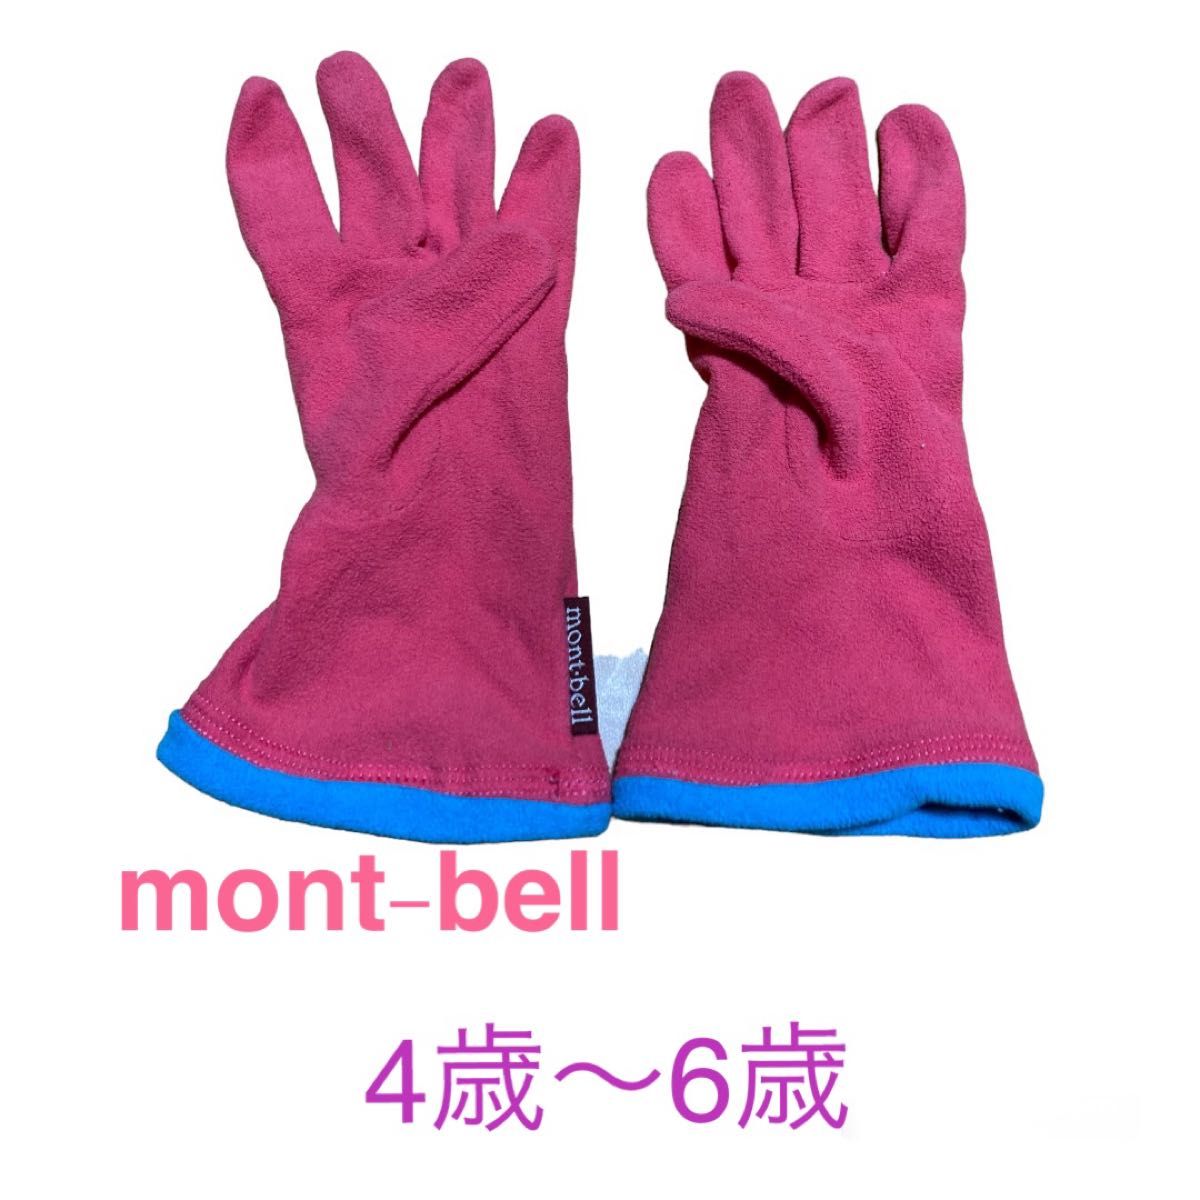 mont-bell モンベル 手袋　キッズ　4歳〜6歳　即購入OK 即日発送　フリース　グローブ